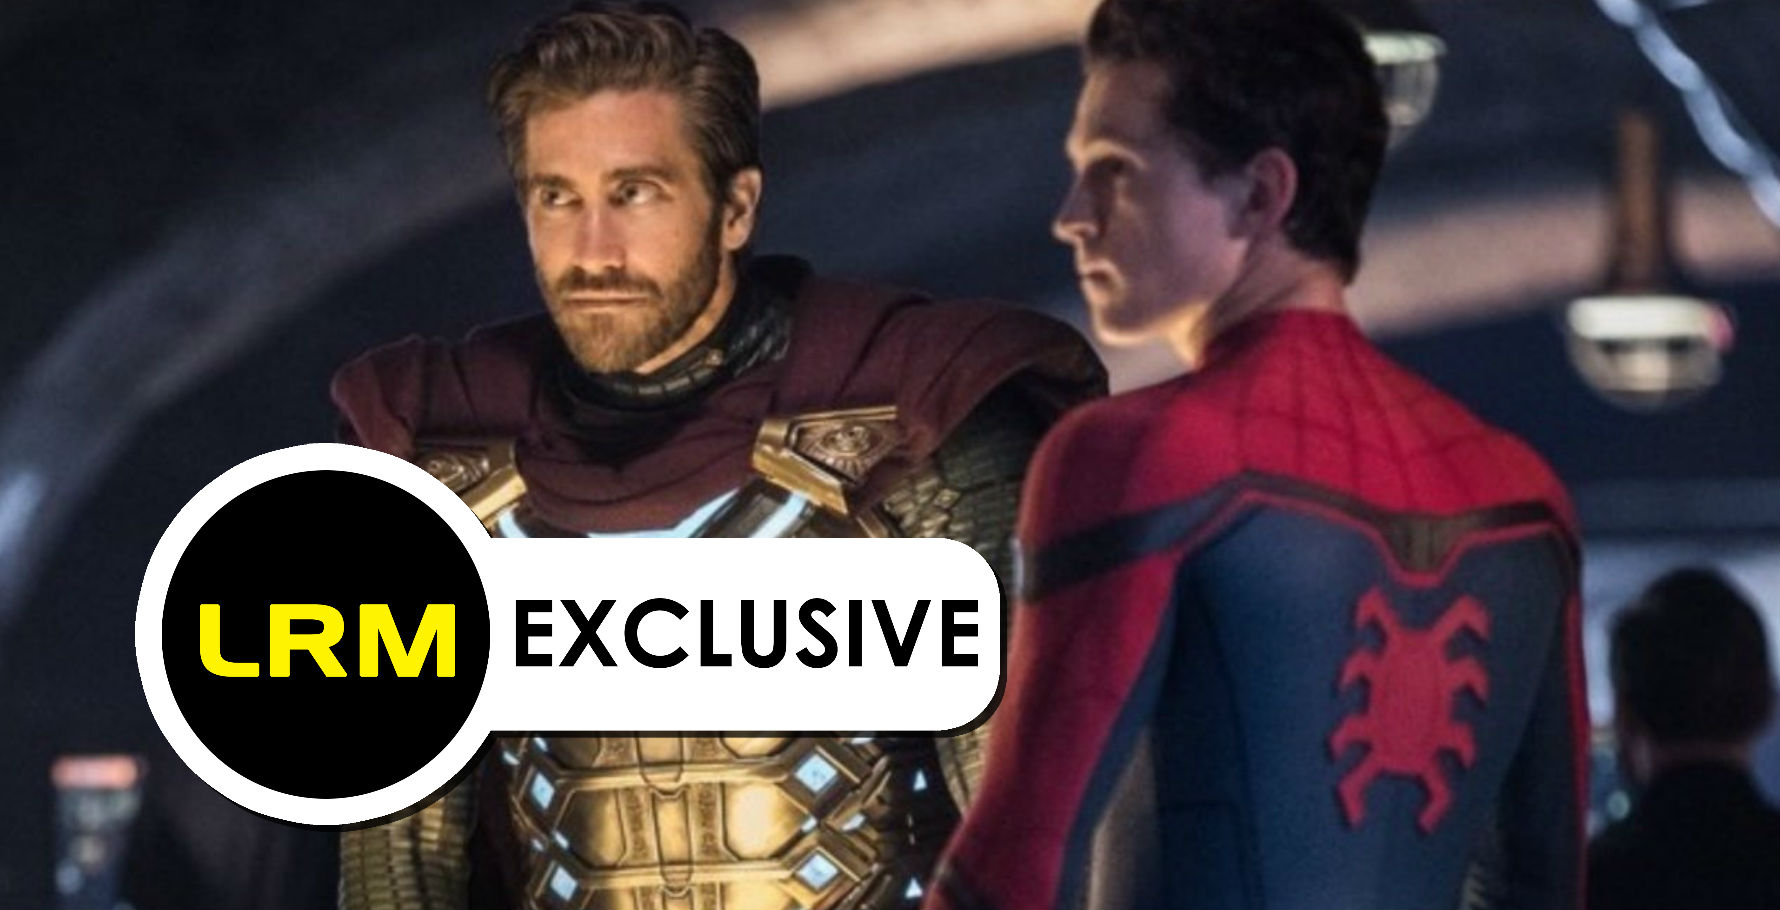 LRM EXCLUSIVE – Spider-Man: Far From Home – One Mysterio Design Had Him Wearing A Spacesuit-Type Costume